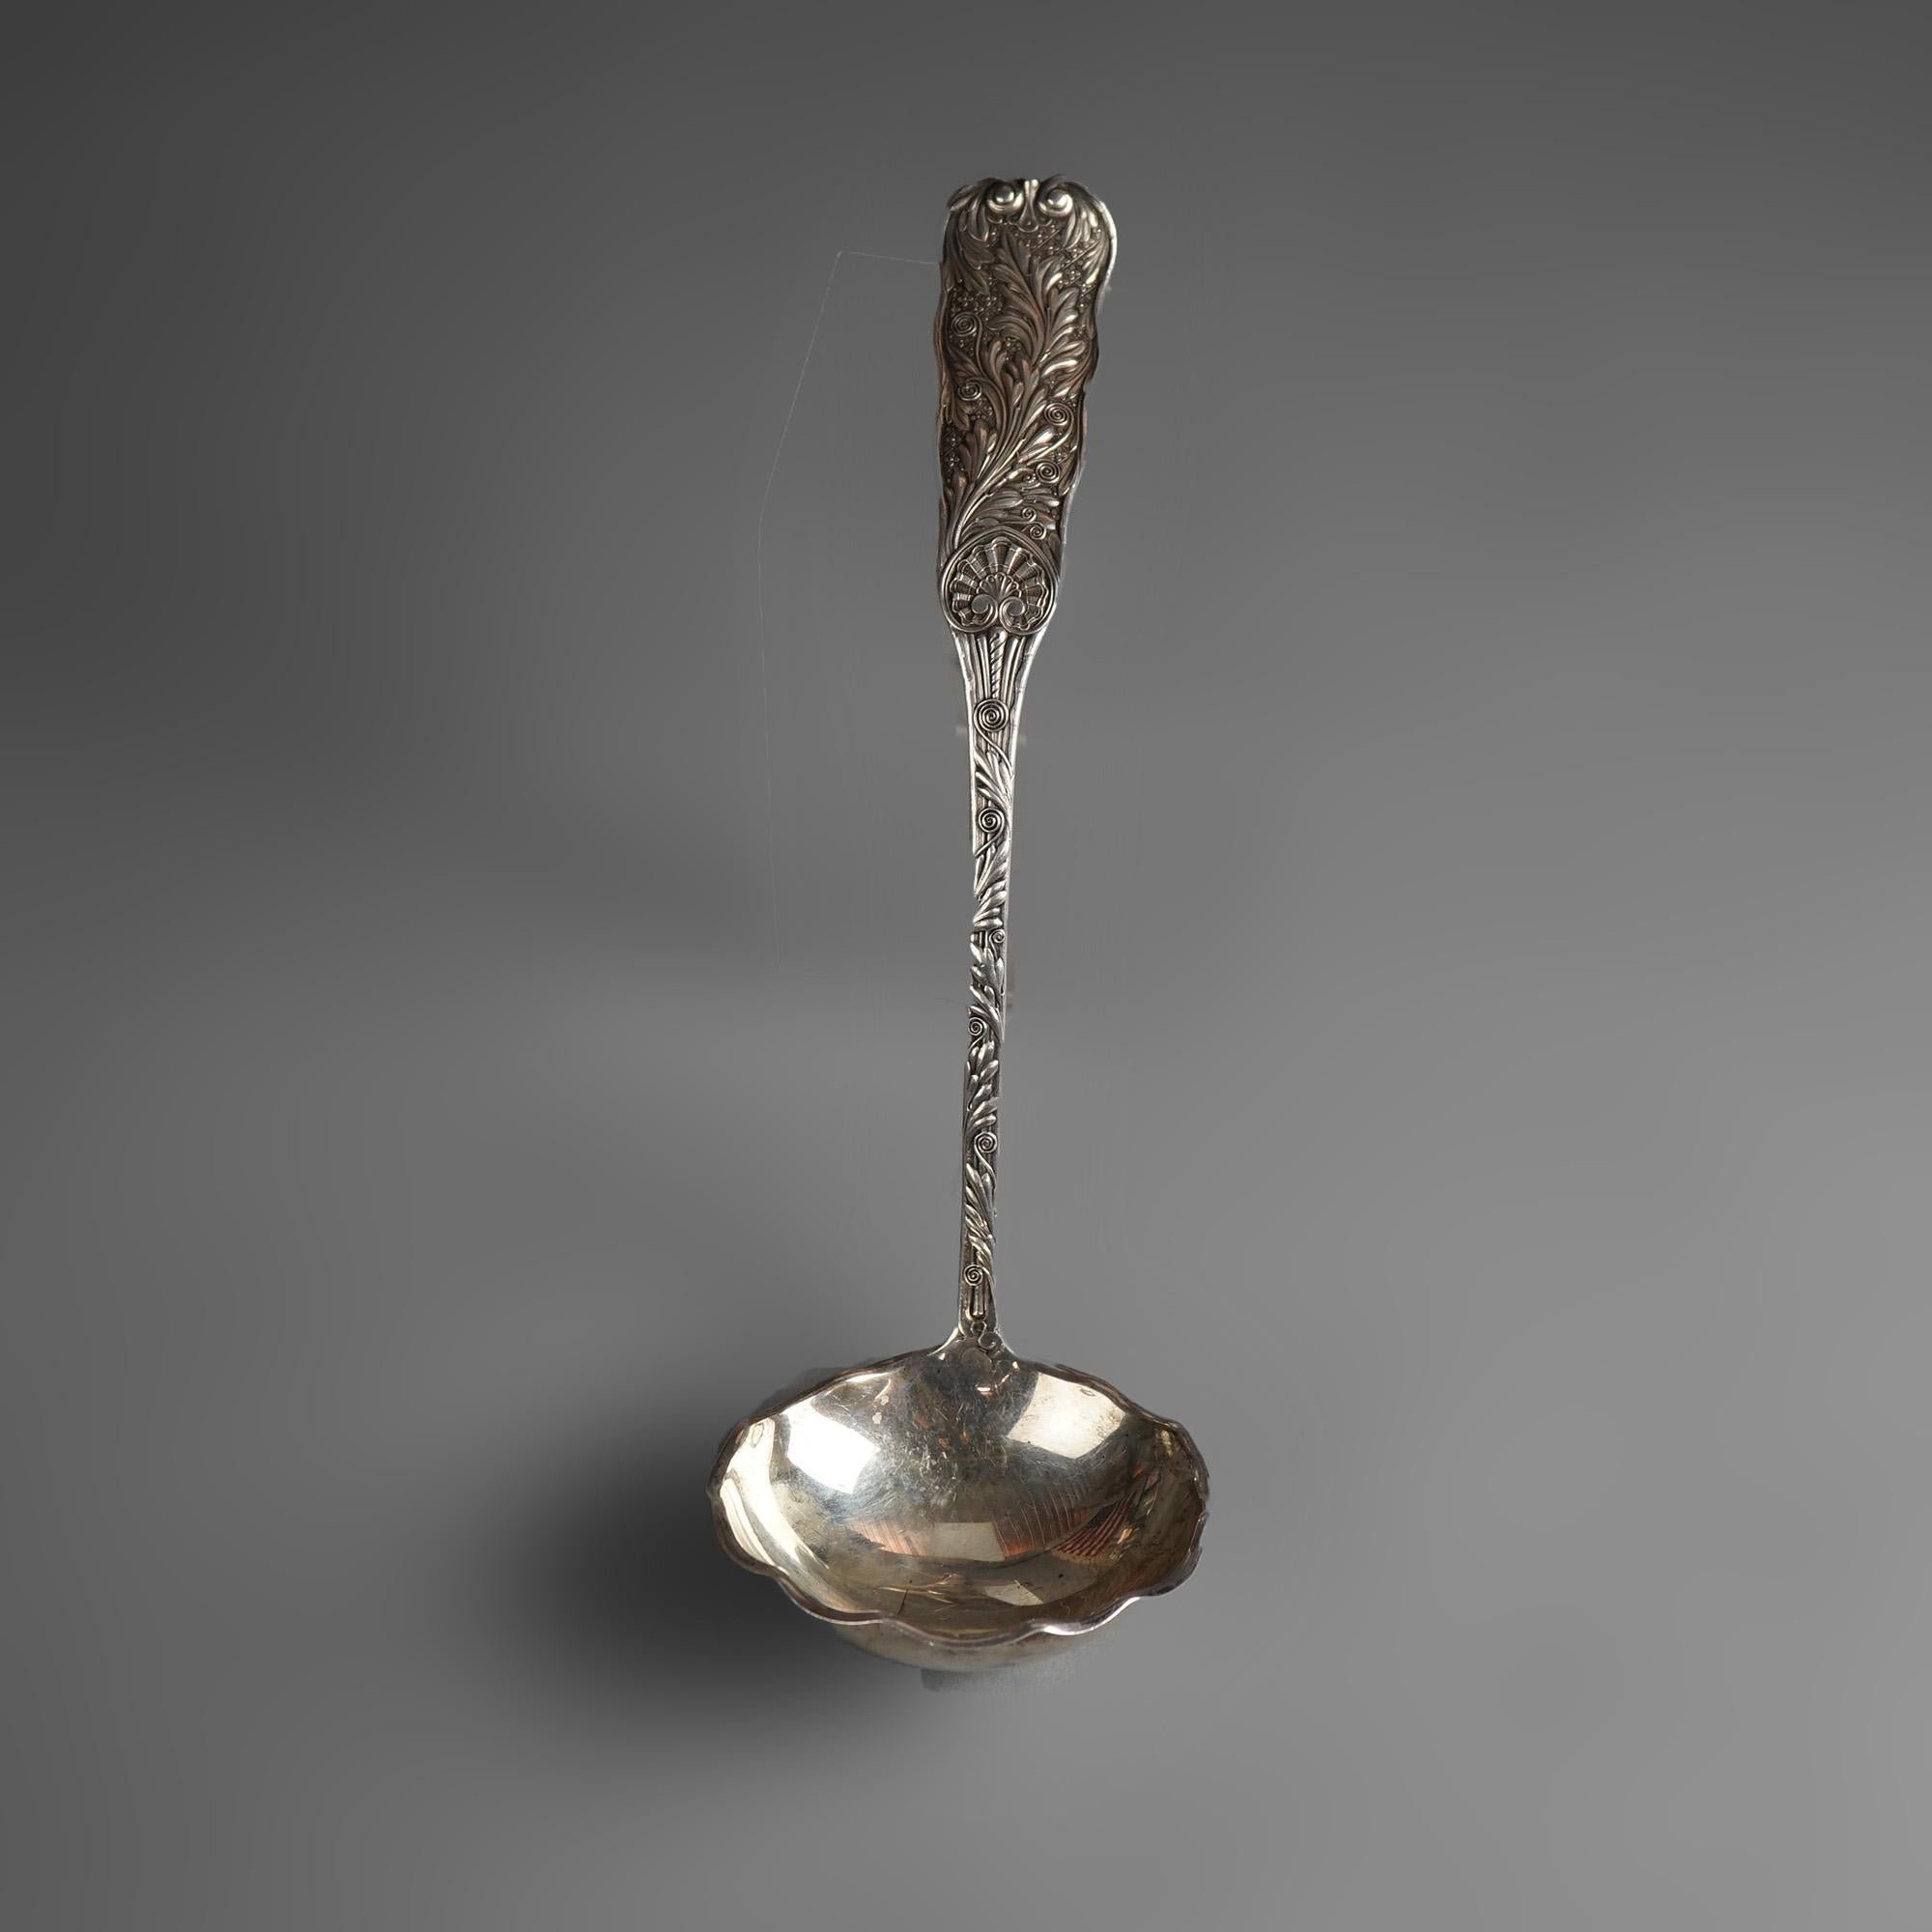 Antique Large Gorham Sterling Silver Ladle with Scalloped Bowl and Foliate Embossed Handle C1890

Measures- 10''H x 4.25''W x 9.5''D